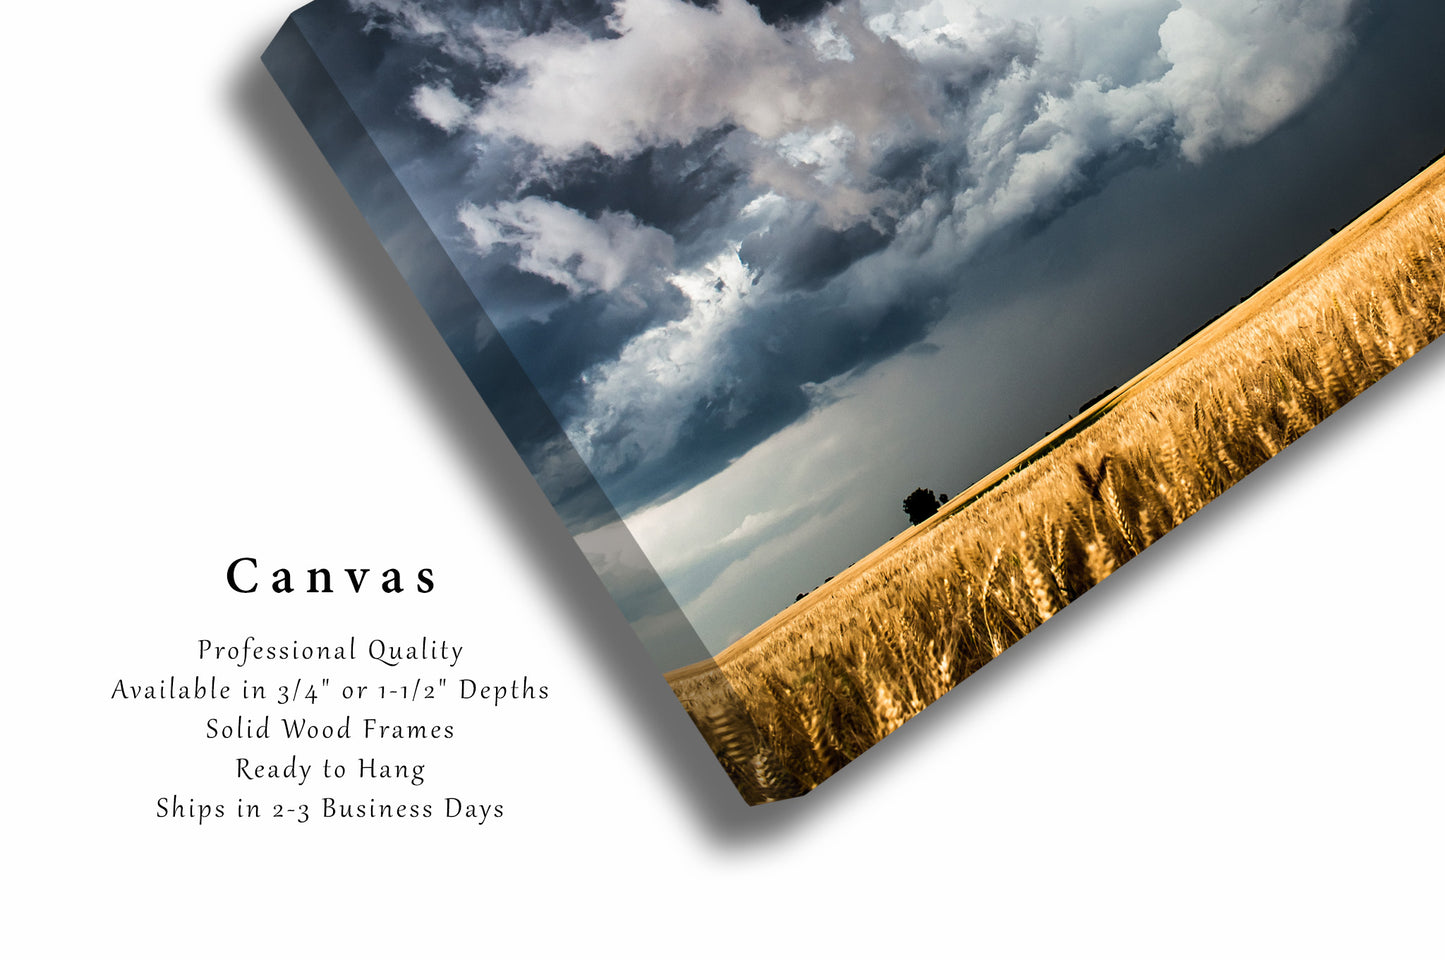 Country Canvas Wall Art (Ready to Hang) Gallery Wrap of Storm Clouds Gathering Over Golden Wheat Field in Kansas Western Photography Farmhouse Decor